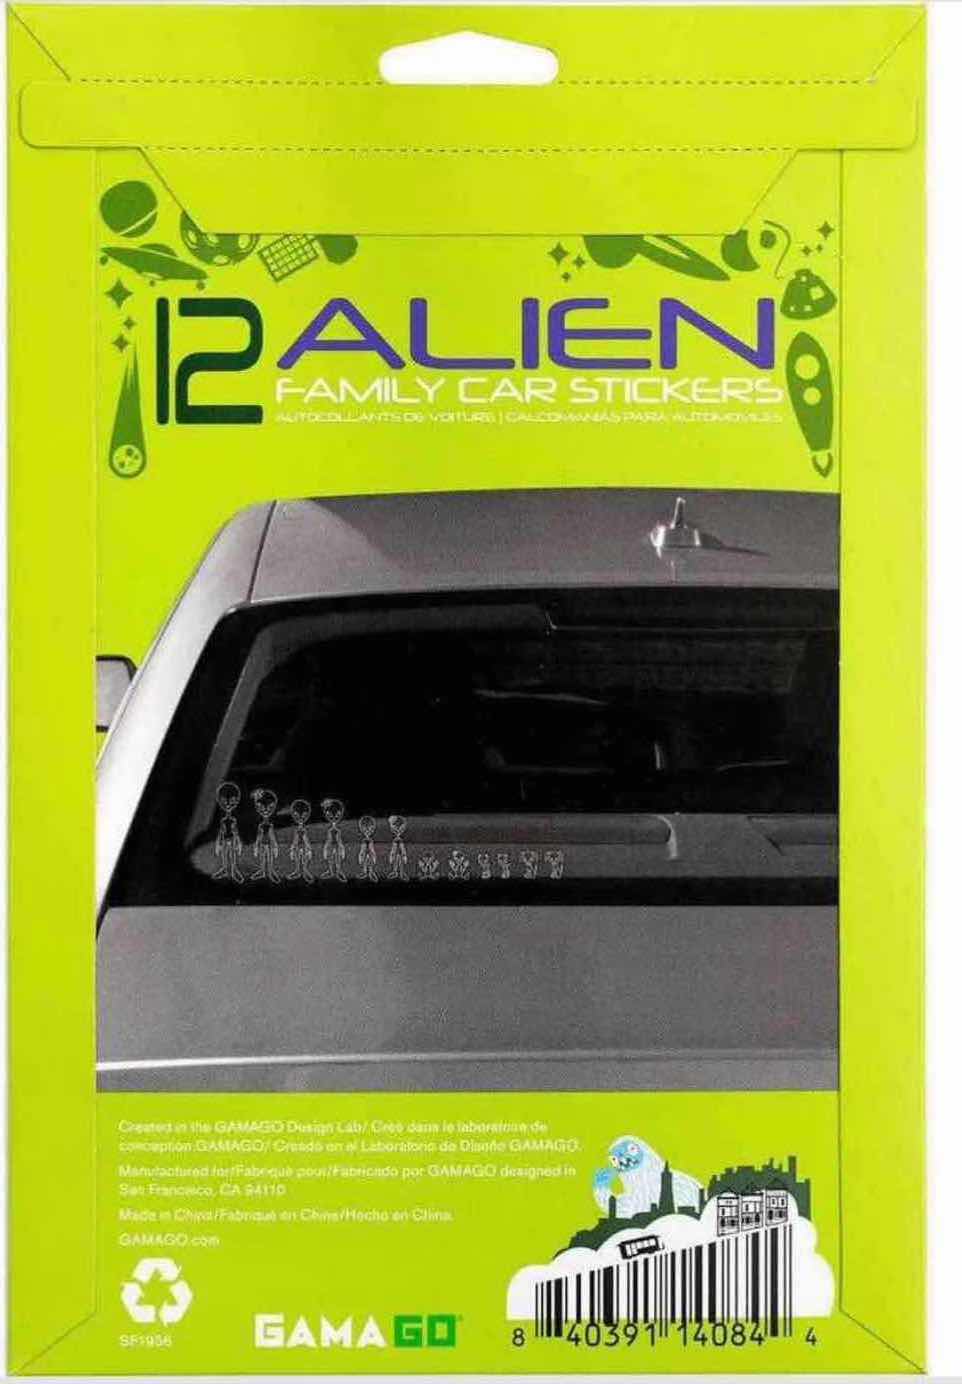 Photo 3 of NEW 4-PACK GAMA GO 12 ALIEN FAMILY CAR STICKERS PACK